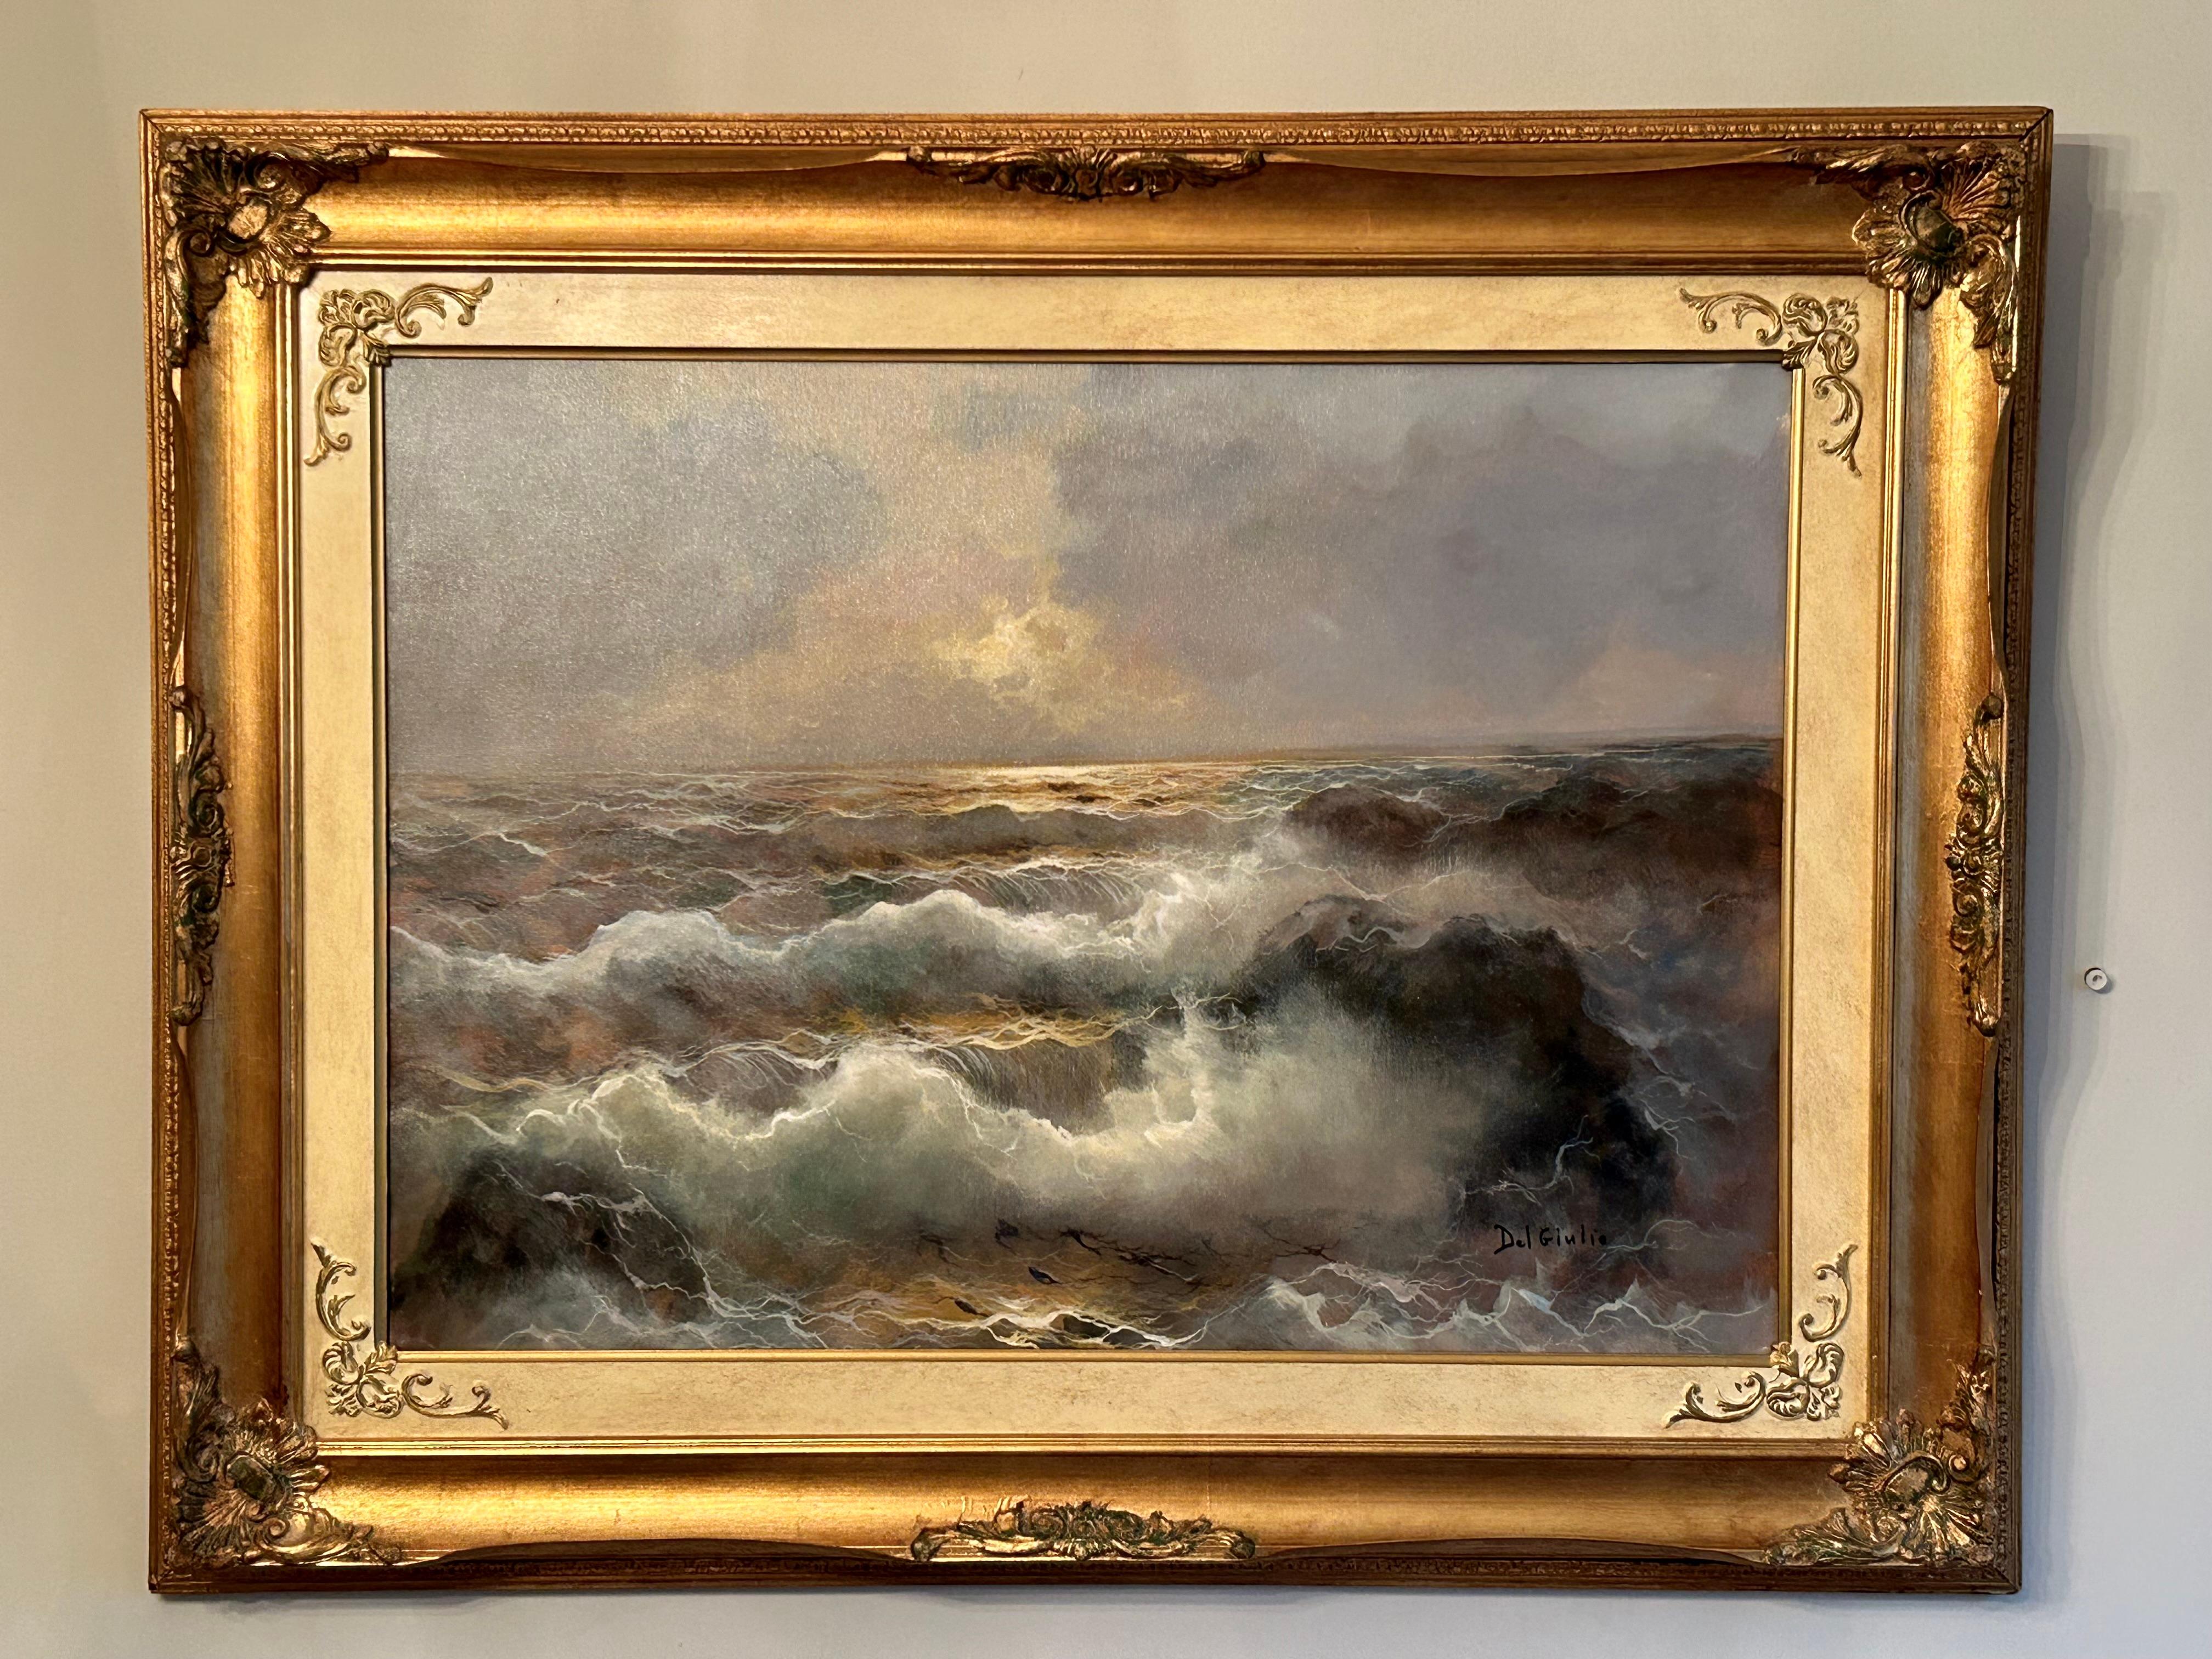 A very atmospheric late 20th century oil on canvas, signed Del Giulio, in a gilt frame, in excellent condition. From Italy.
36.75